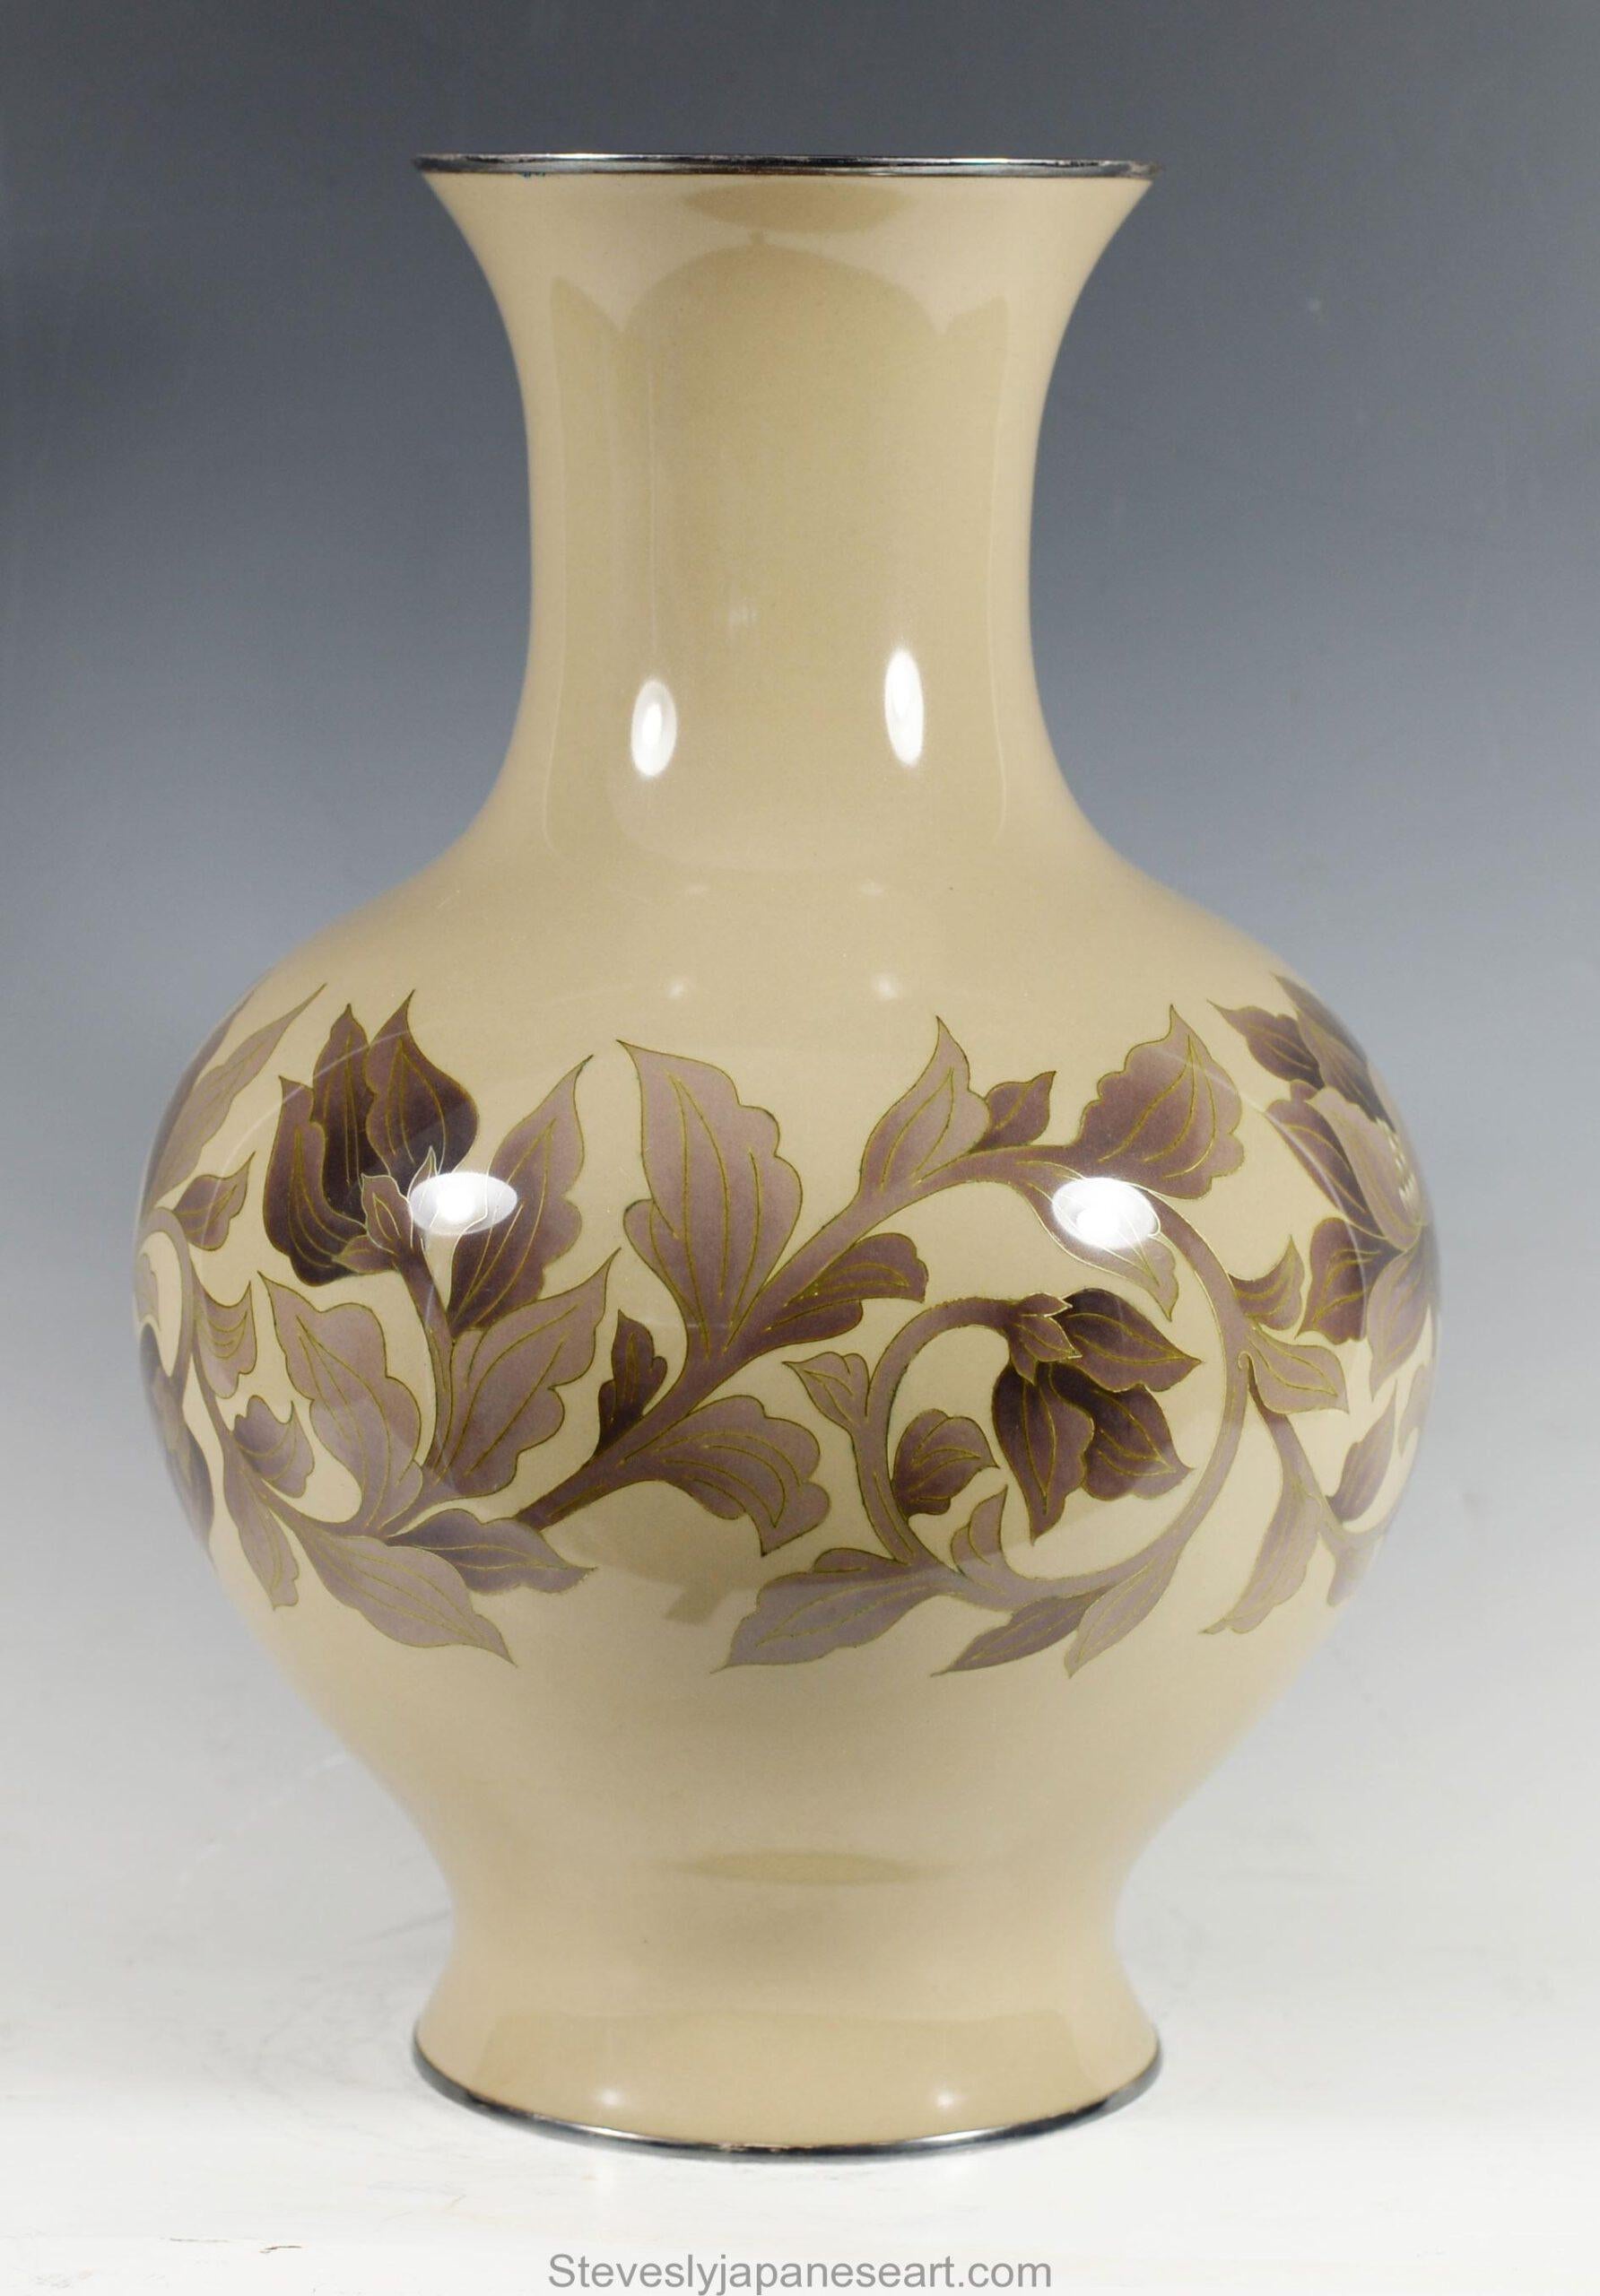 As part of our Japanese works of art collection we are delighted to offer this large early 20thc Meiji/Taisho period , circa 1920’s Cloisonné enamel vase by the highly regarded Ando Jubei company, this large globular beige coloured vase is